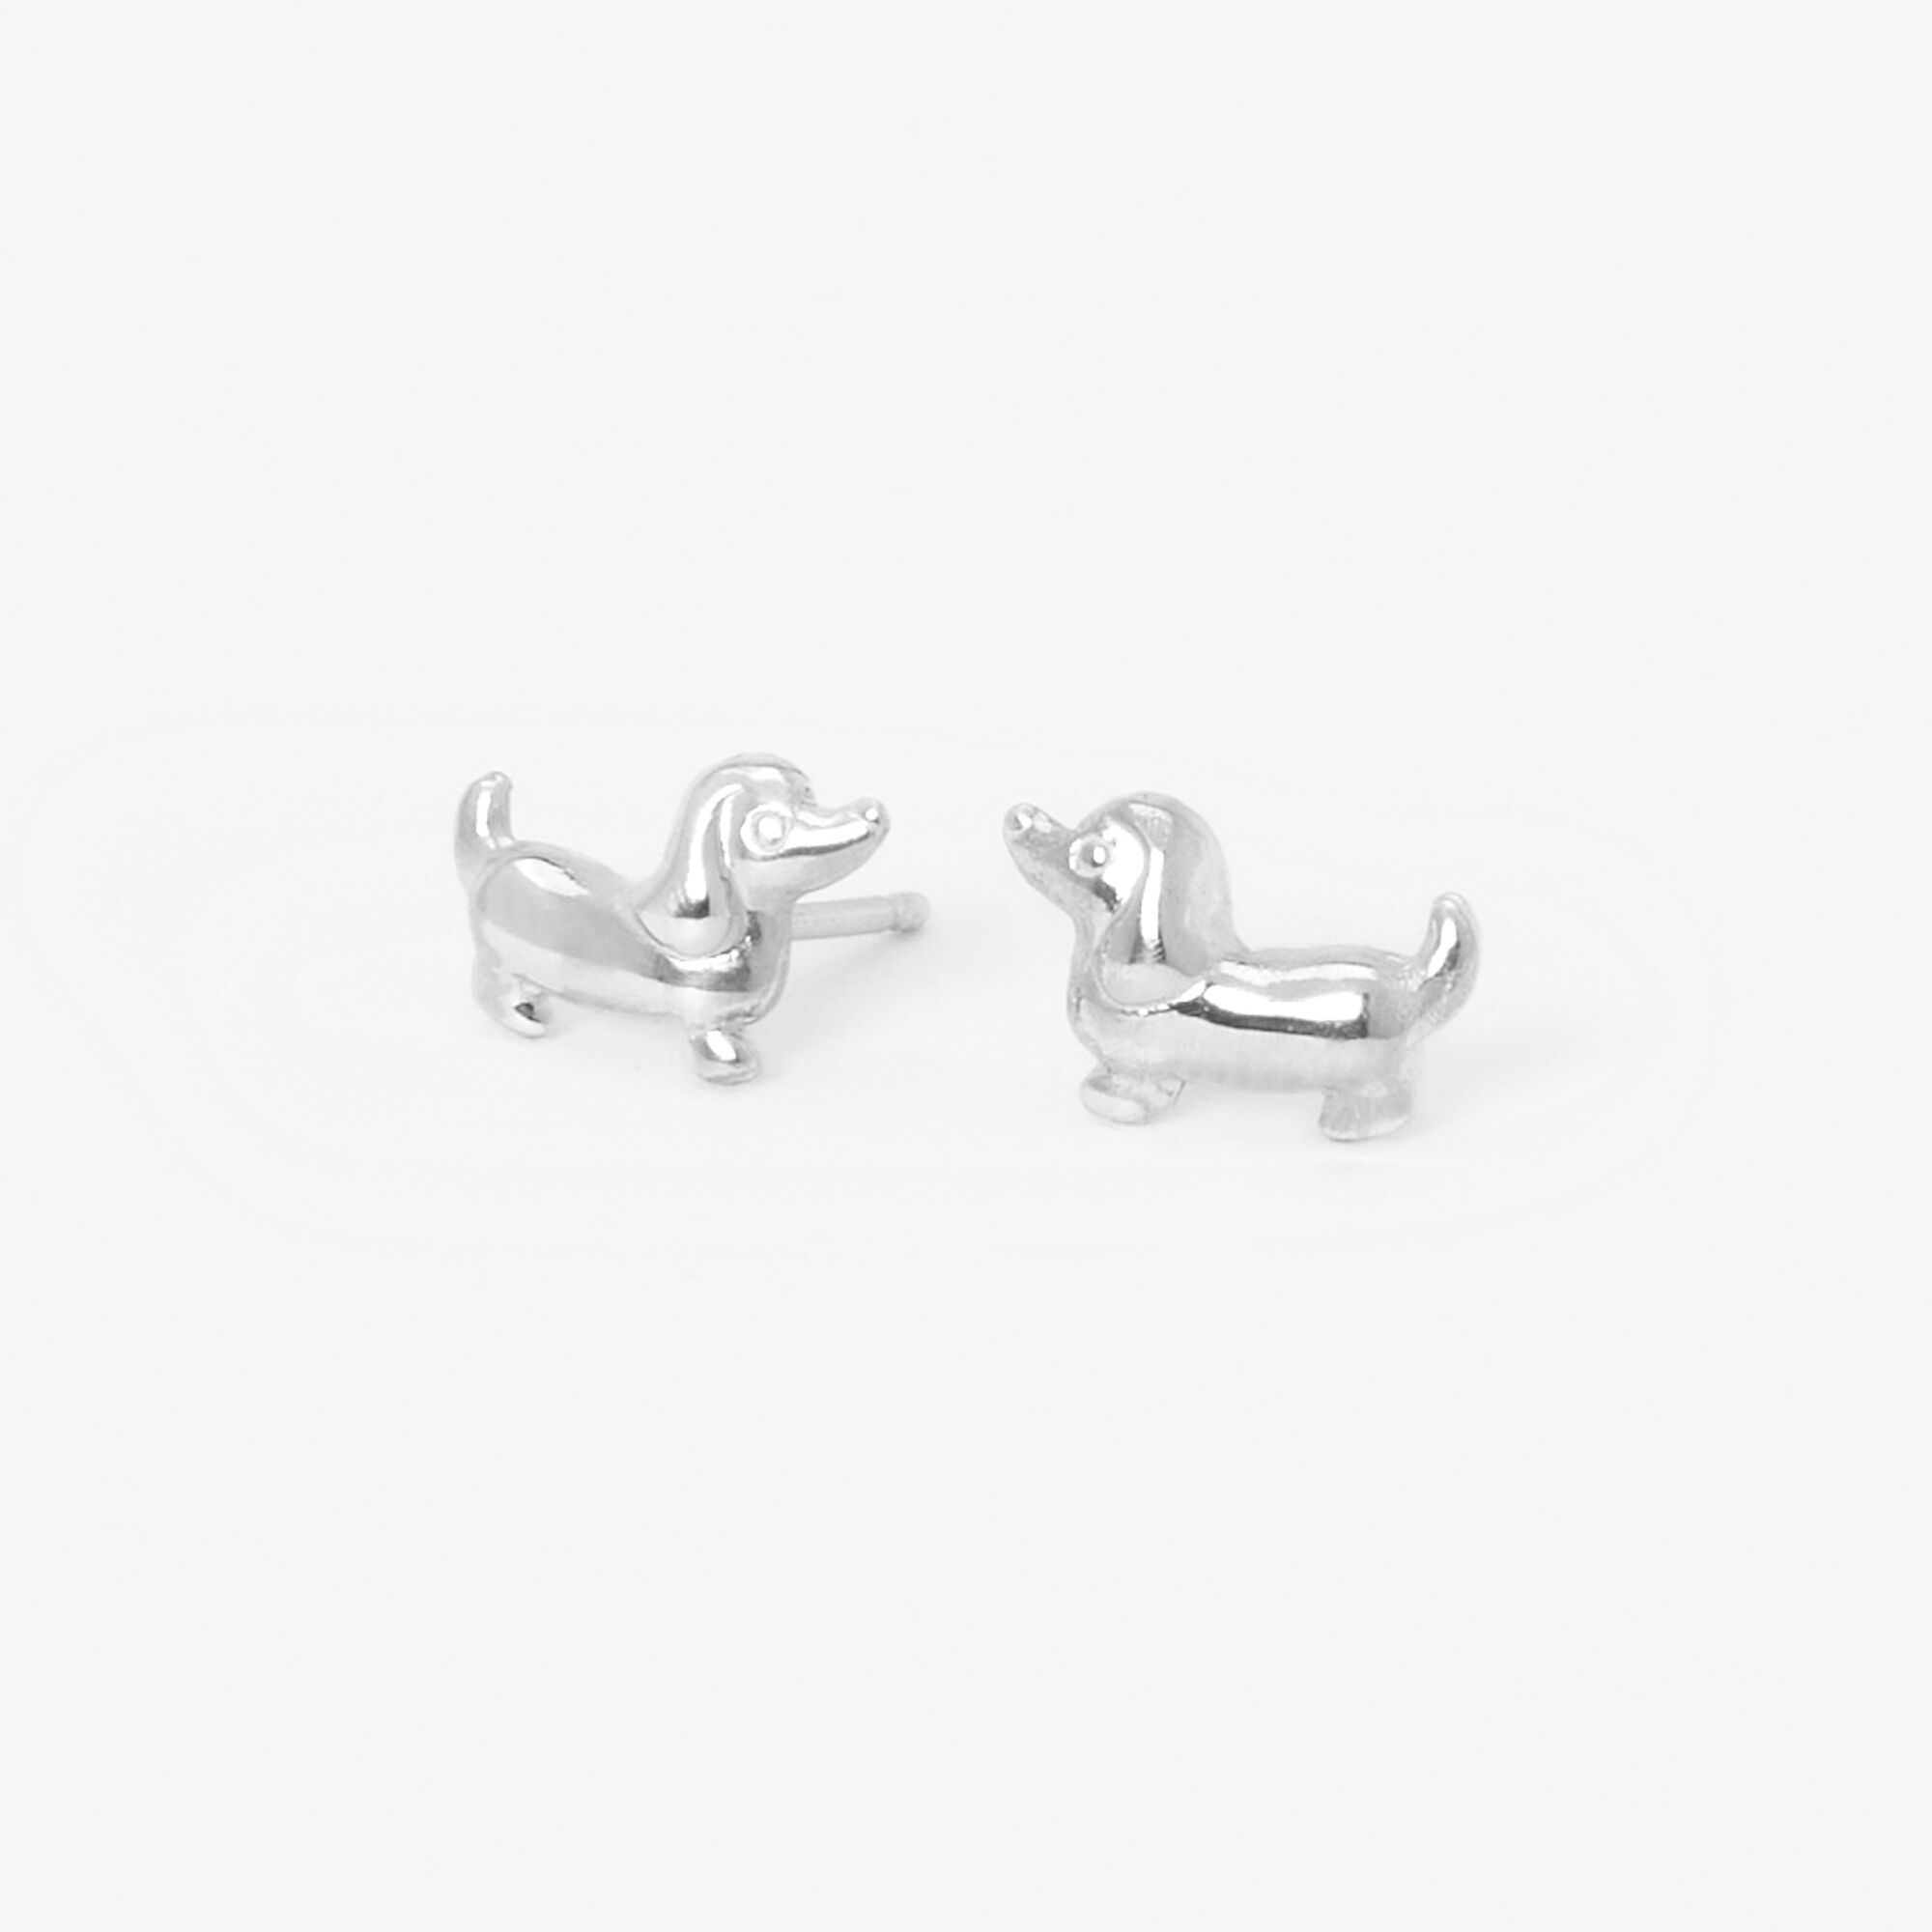 View Claires Wiener Dog Stud Earrings Silver information